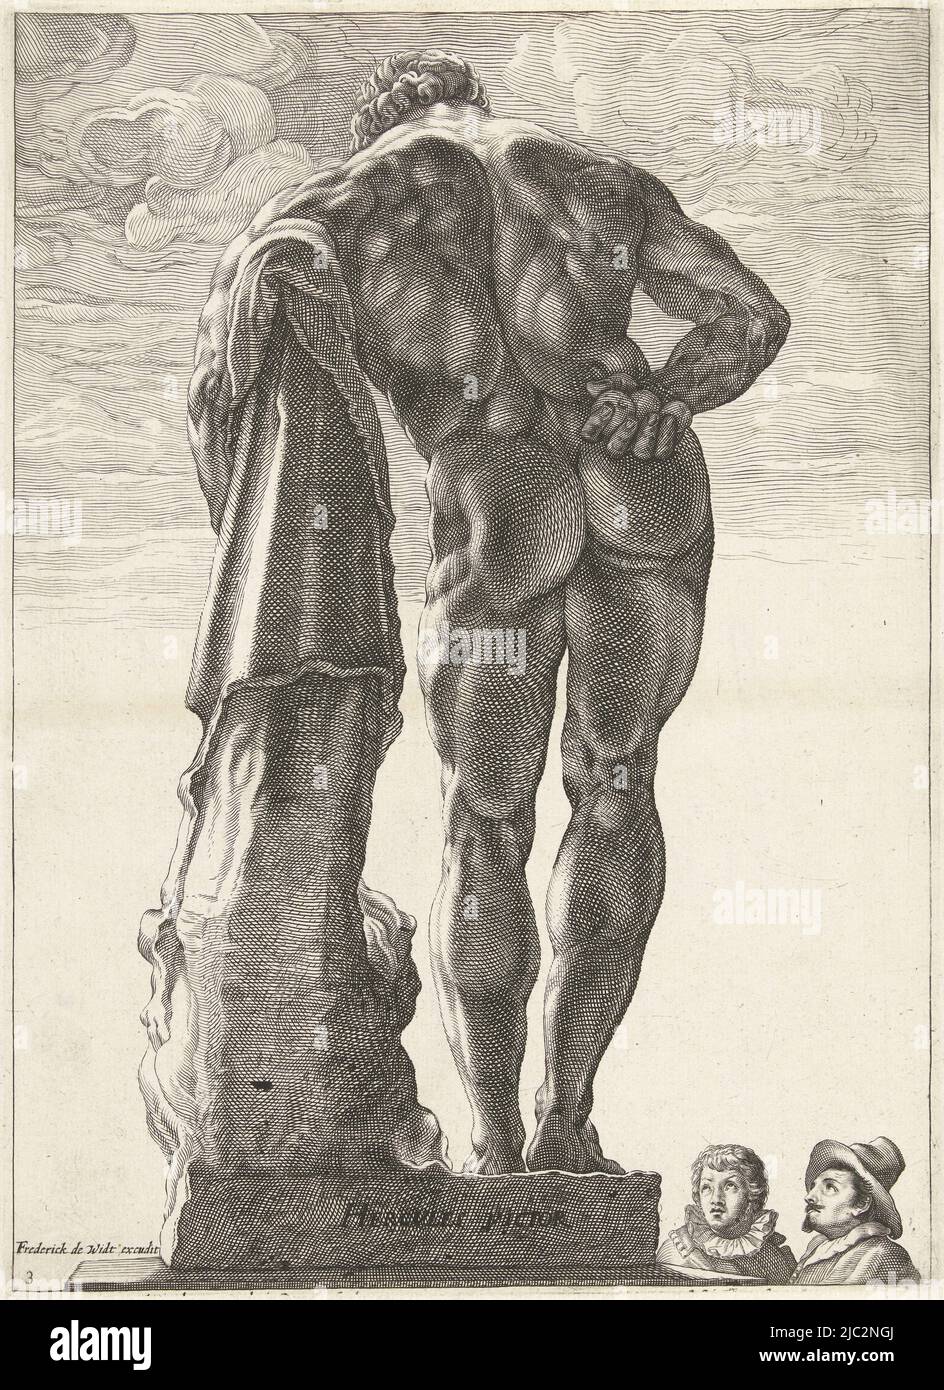 A large statue of Hercules, seen from behind, leaning on his club. Until 1787 this statue stood in the Palazzo Farnese, hence the name Hercules Farnese. Two men can be seen observing the statue, Hercules Farnese Hercules Victor (title on object) Three antique statues in Rome after Goltzius (series title), print maker: Nicolaes de Bruyn, print maker: Nicolaas Braeu, (rejected attribution), Hendrick Goltzius, print maker: Netherlands, print maker: Haarlem, Haarlem, publisher: Amsterdam, after c. 1592 - in or after c. 1605 and/or c. 1645 - c. 1706, paper, engraving, h 258 mm, w 188 mm Stock Photo